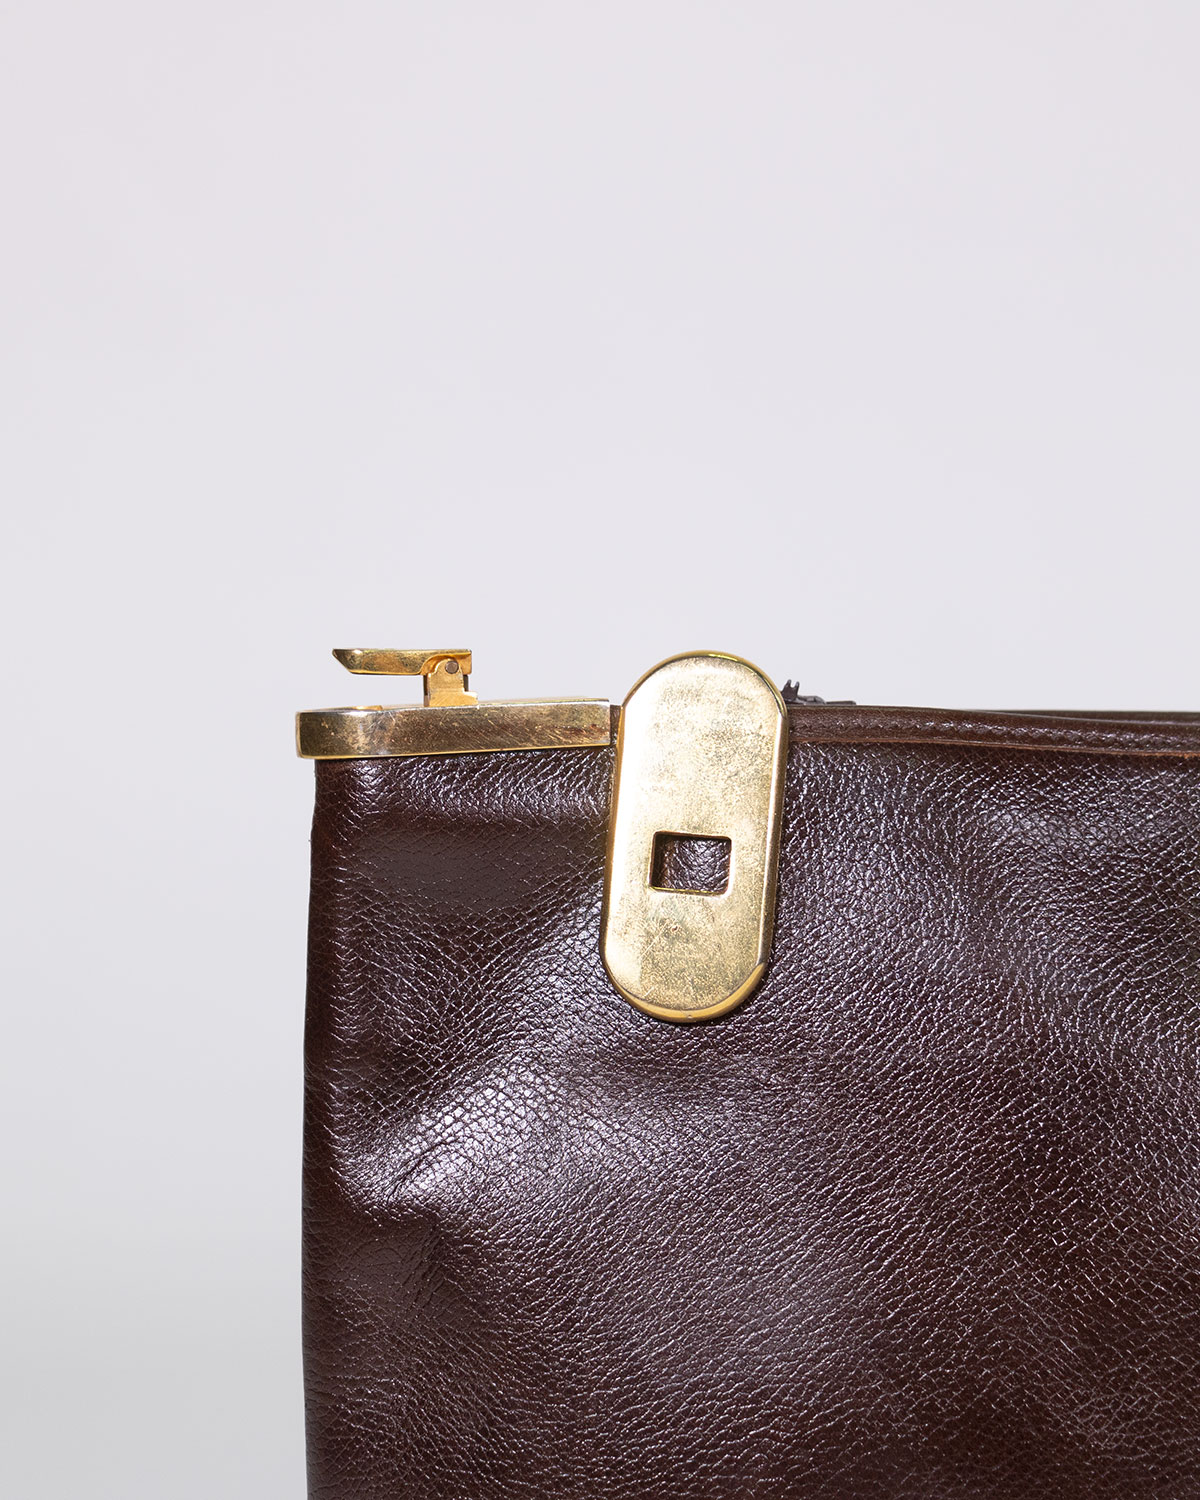 Christian Dior - 70s Leather clutch